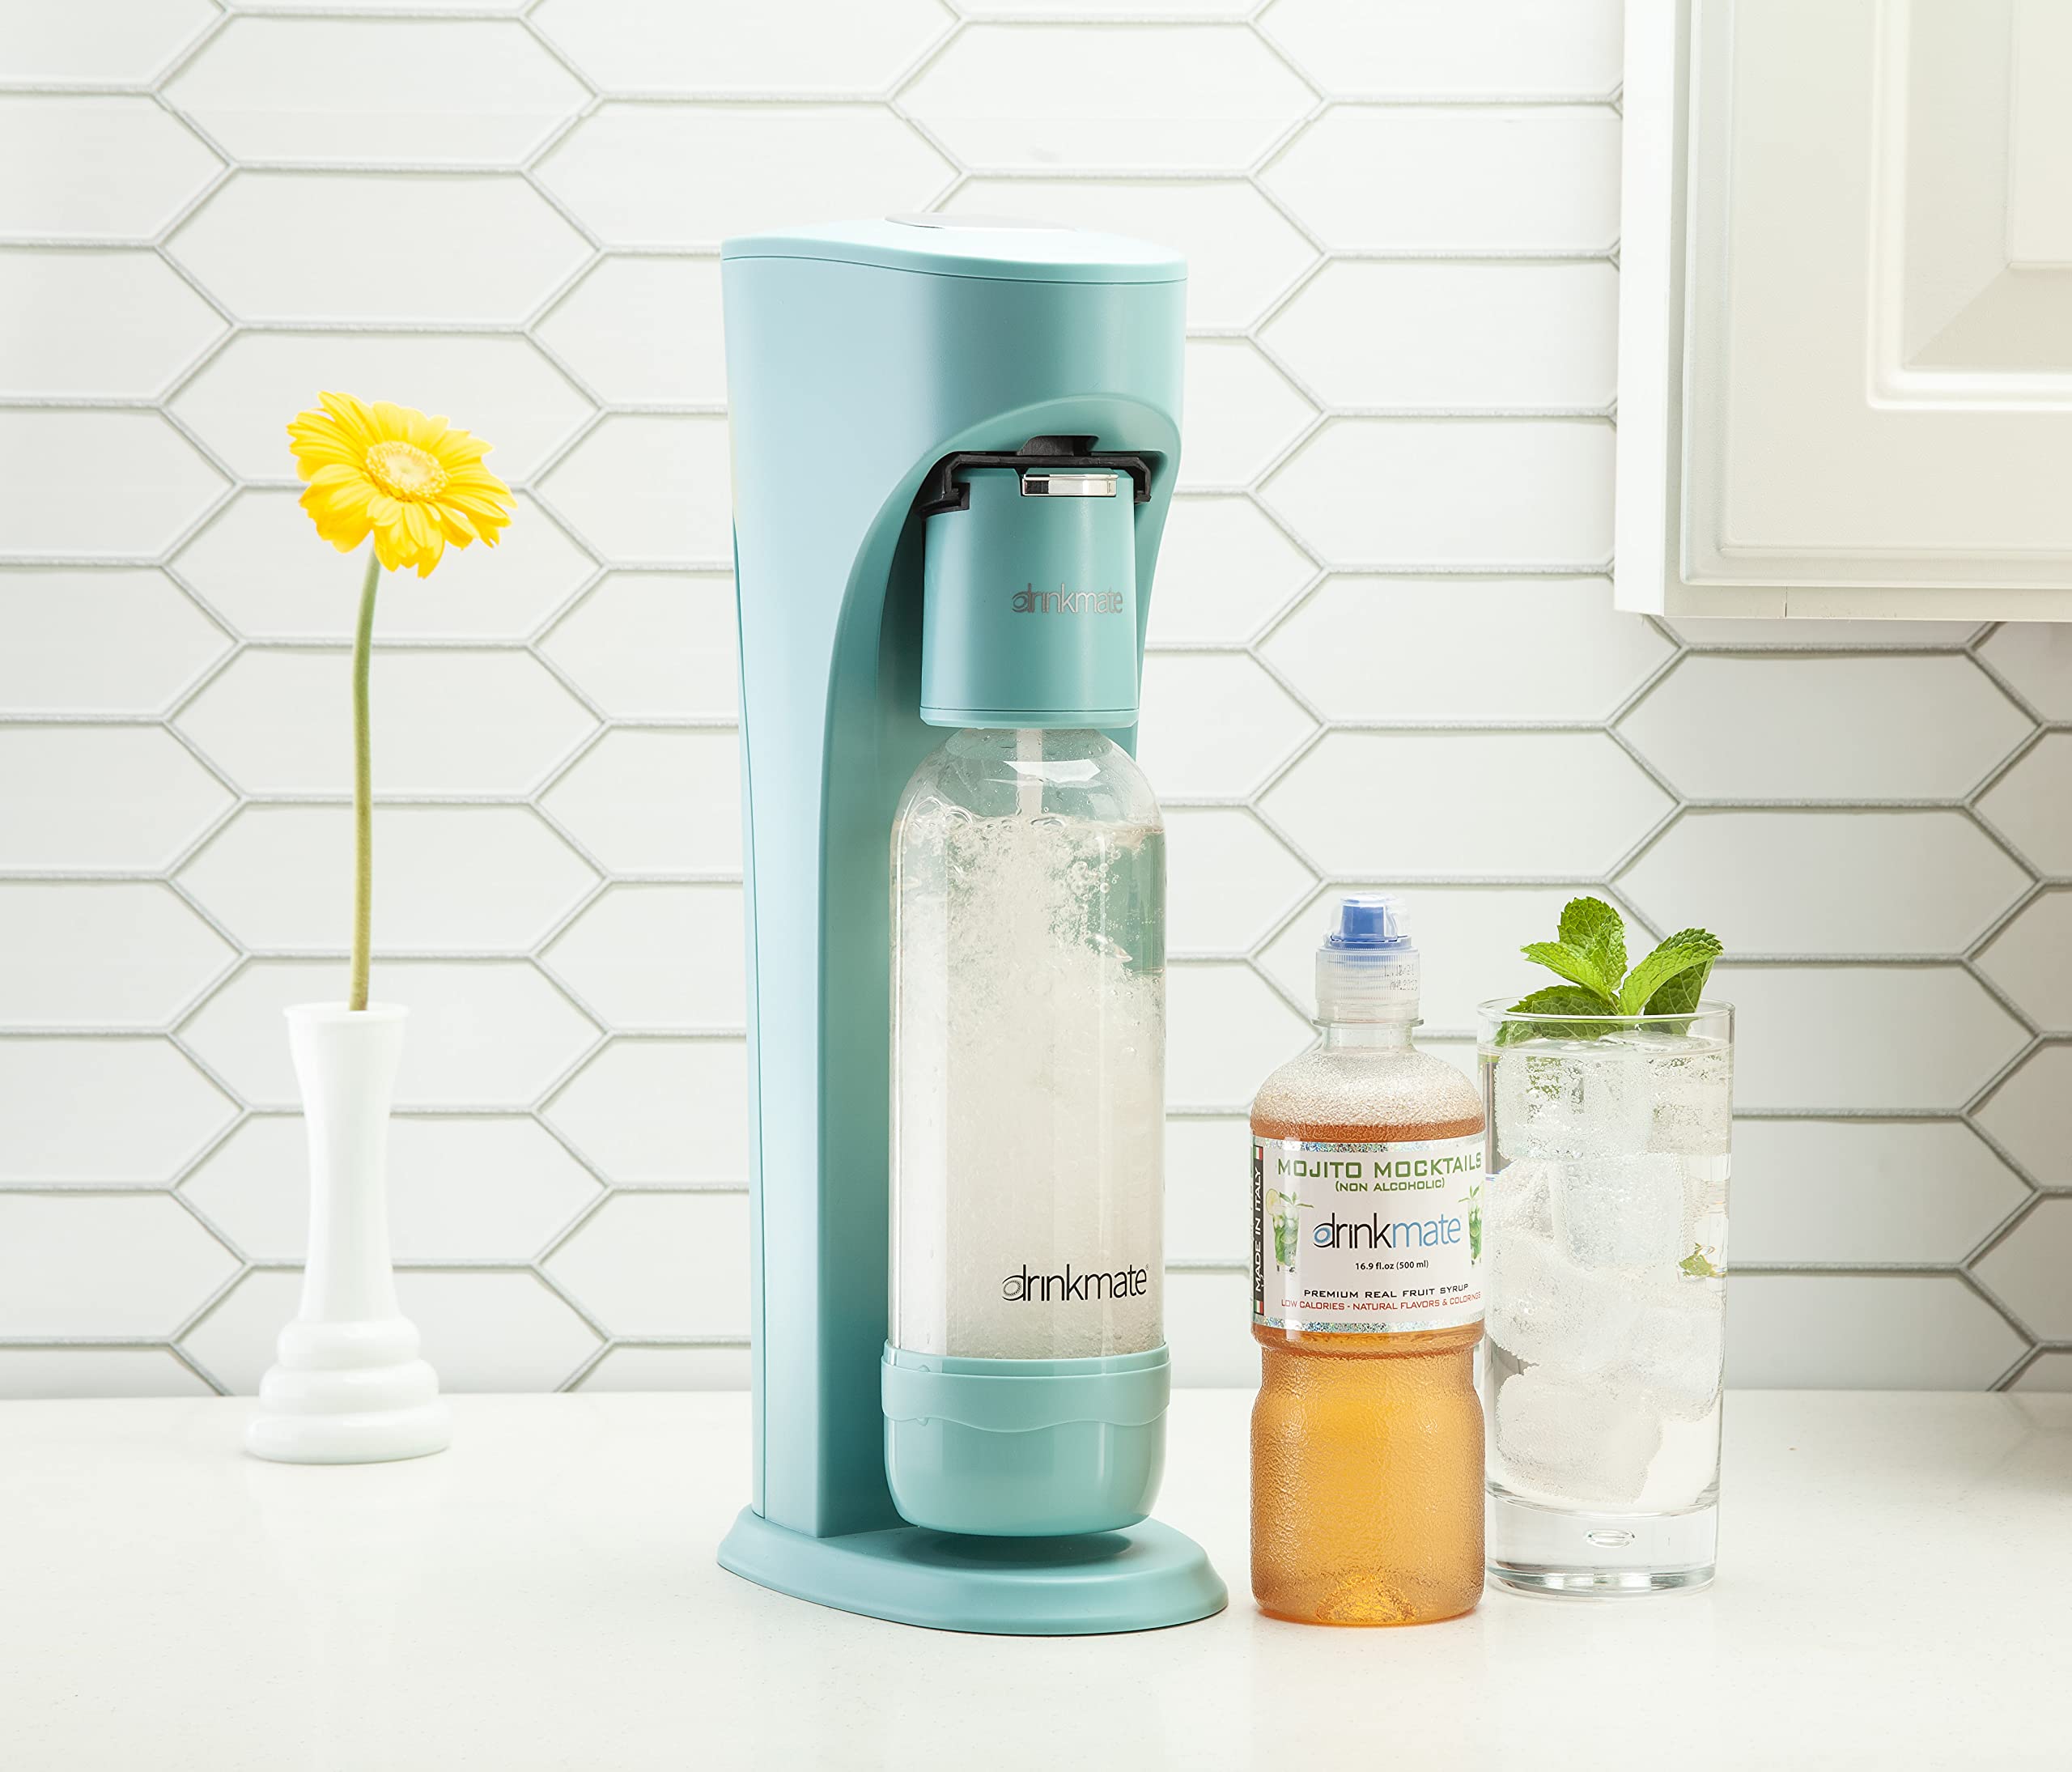 Drinkmate OmniFizz Sparkling Water and Soda Maker, Carbonates Any Drink, ULTIMATE BUNDLE With CO2 and BPA Free Bottles (Arctic Blue)